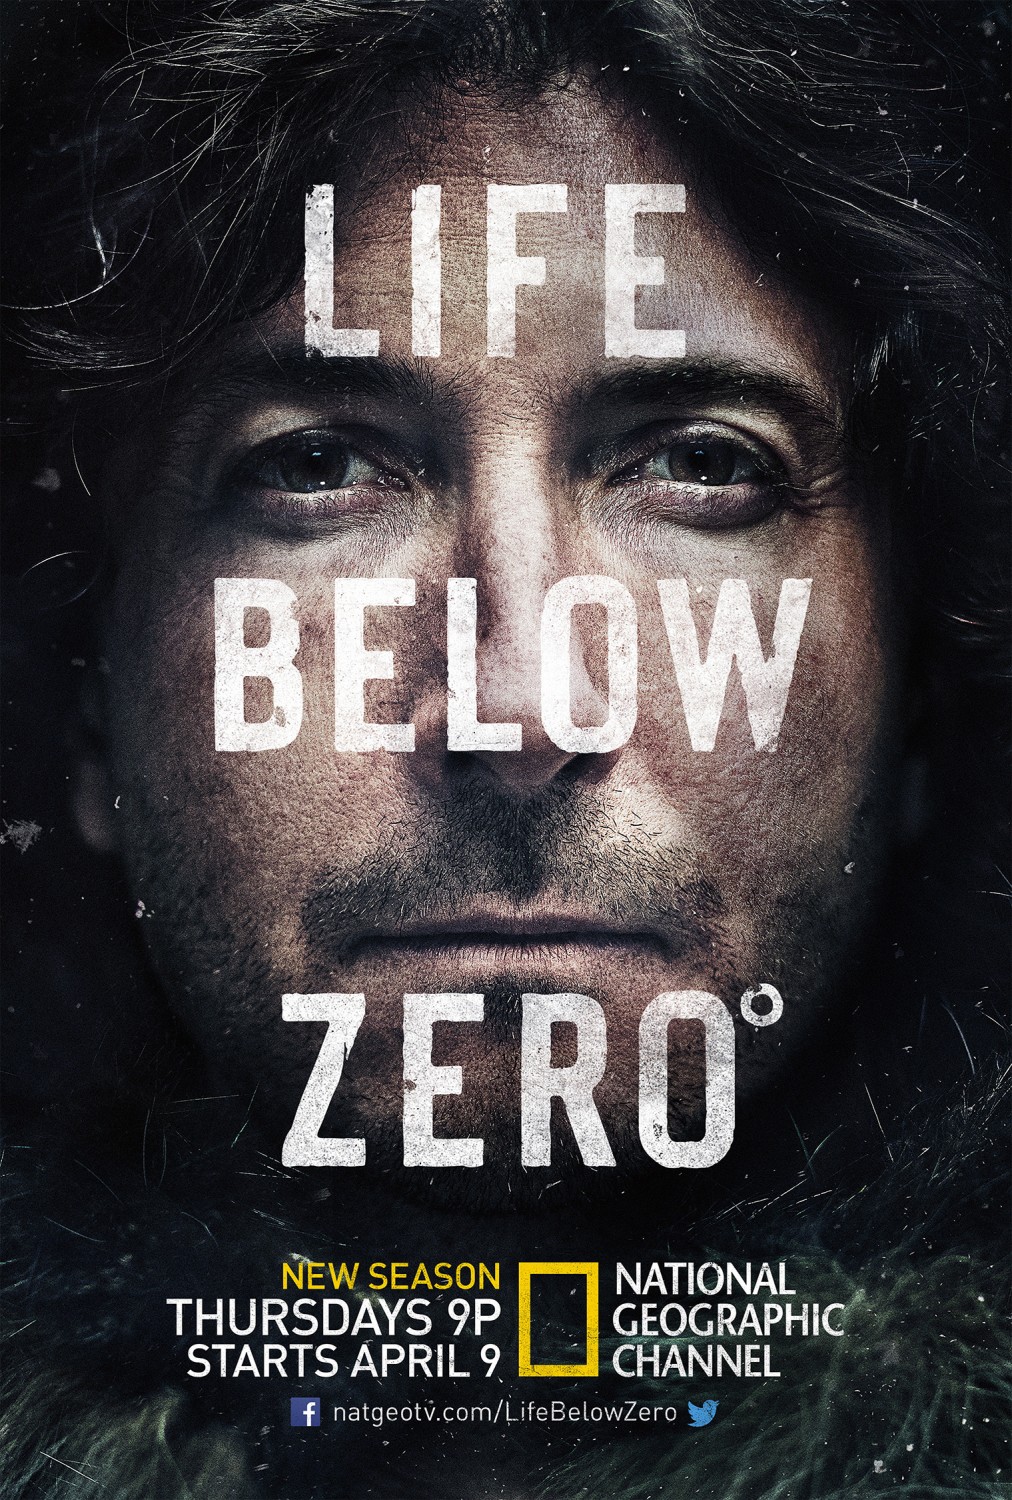 Extra Large TV Poster Image for Life Below Zero (#5 of 7)